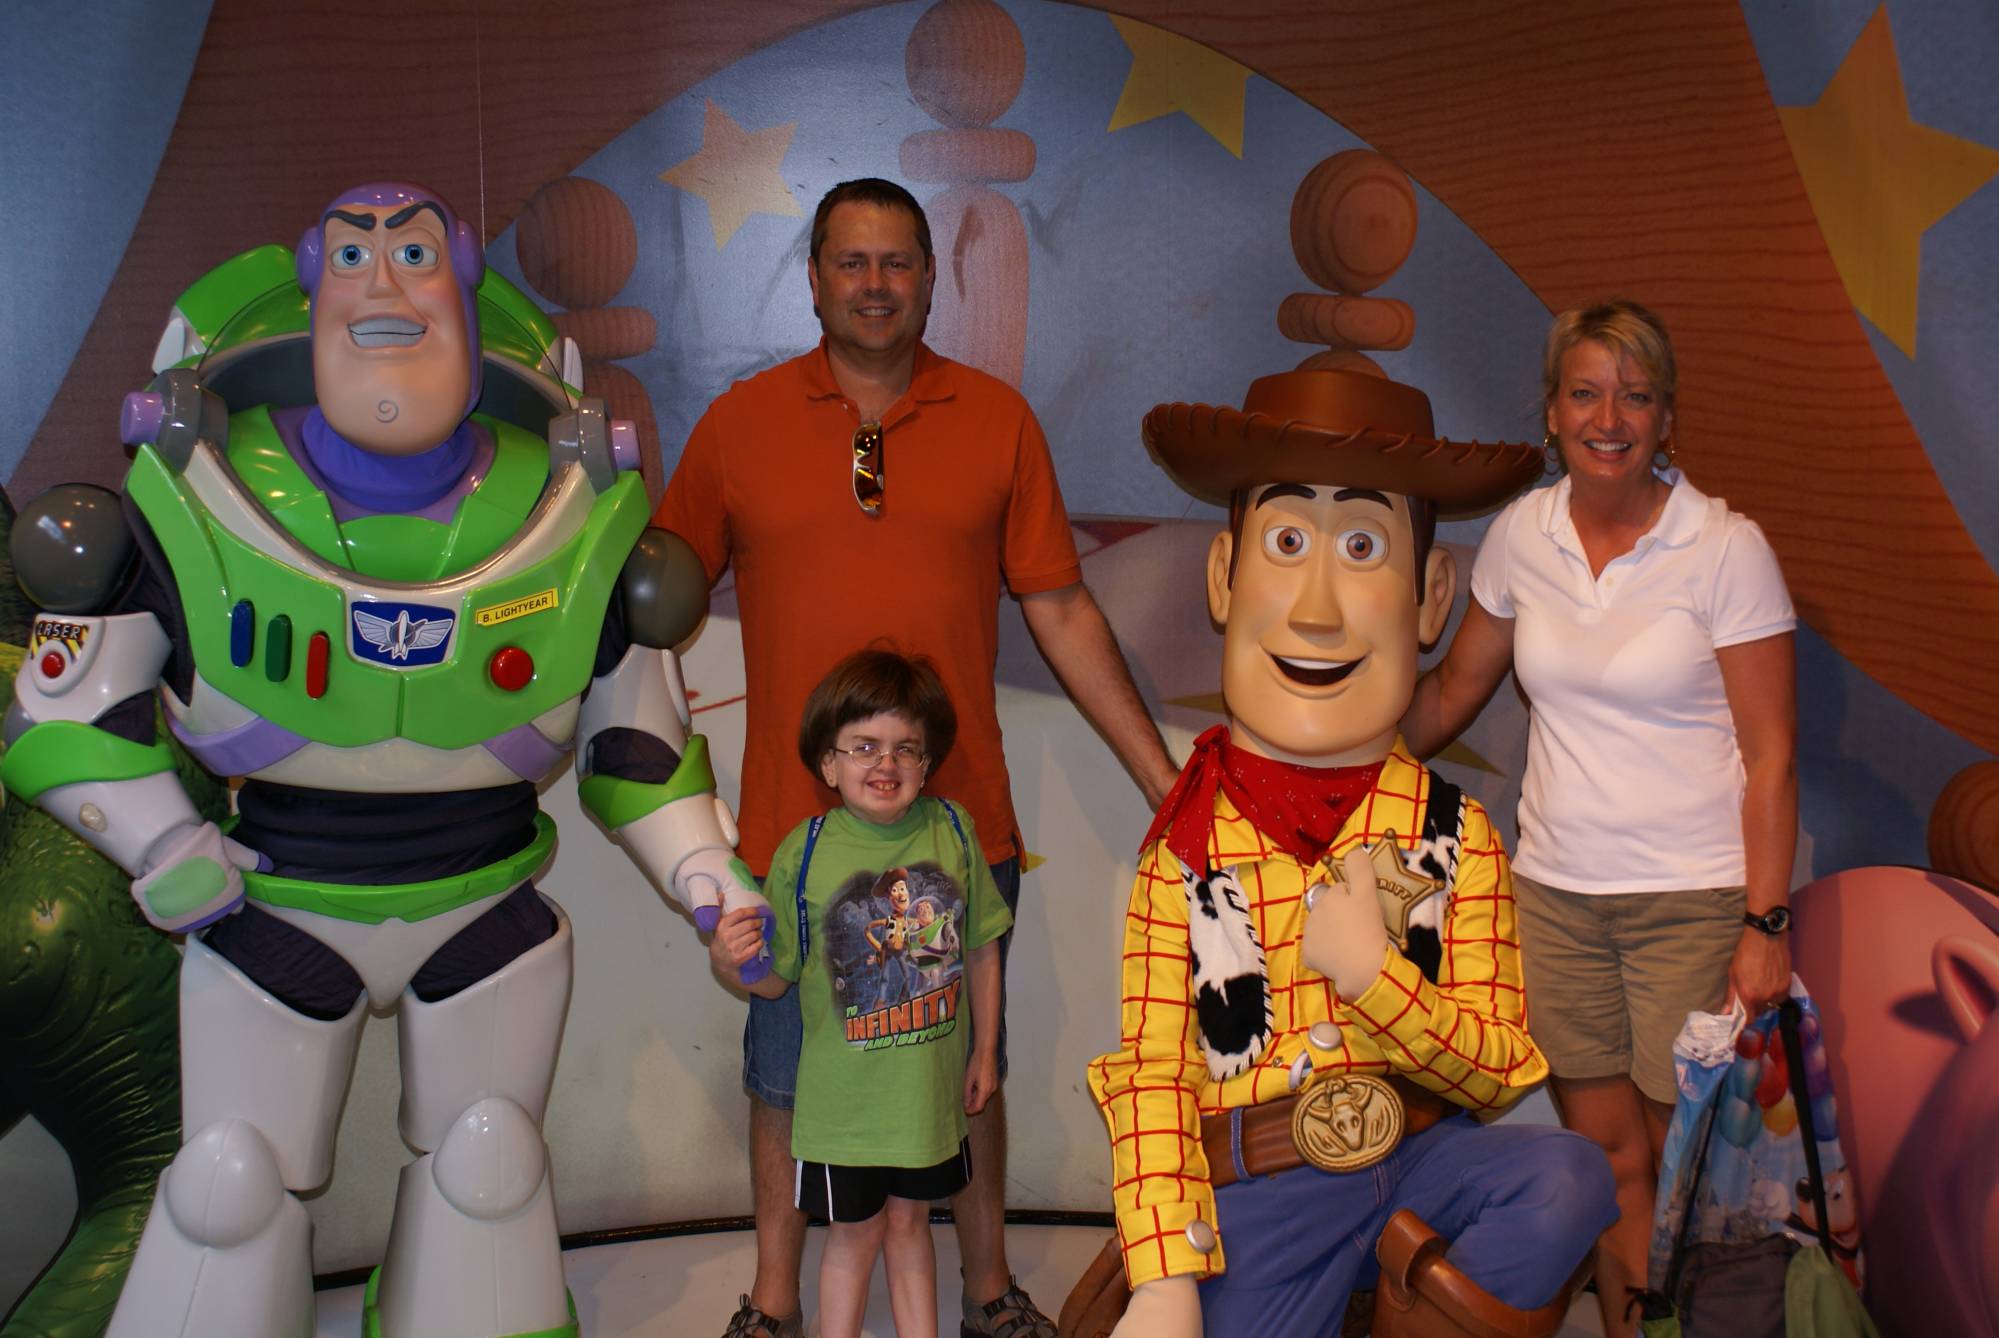 Meeting the Toy Story Gang 2